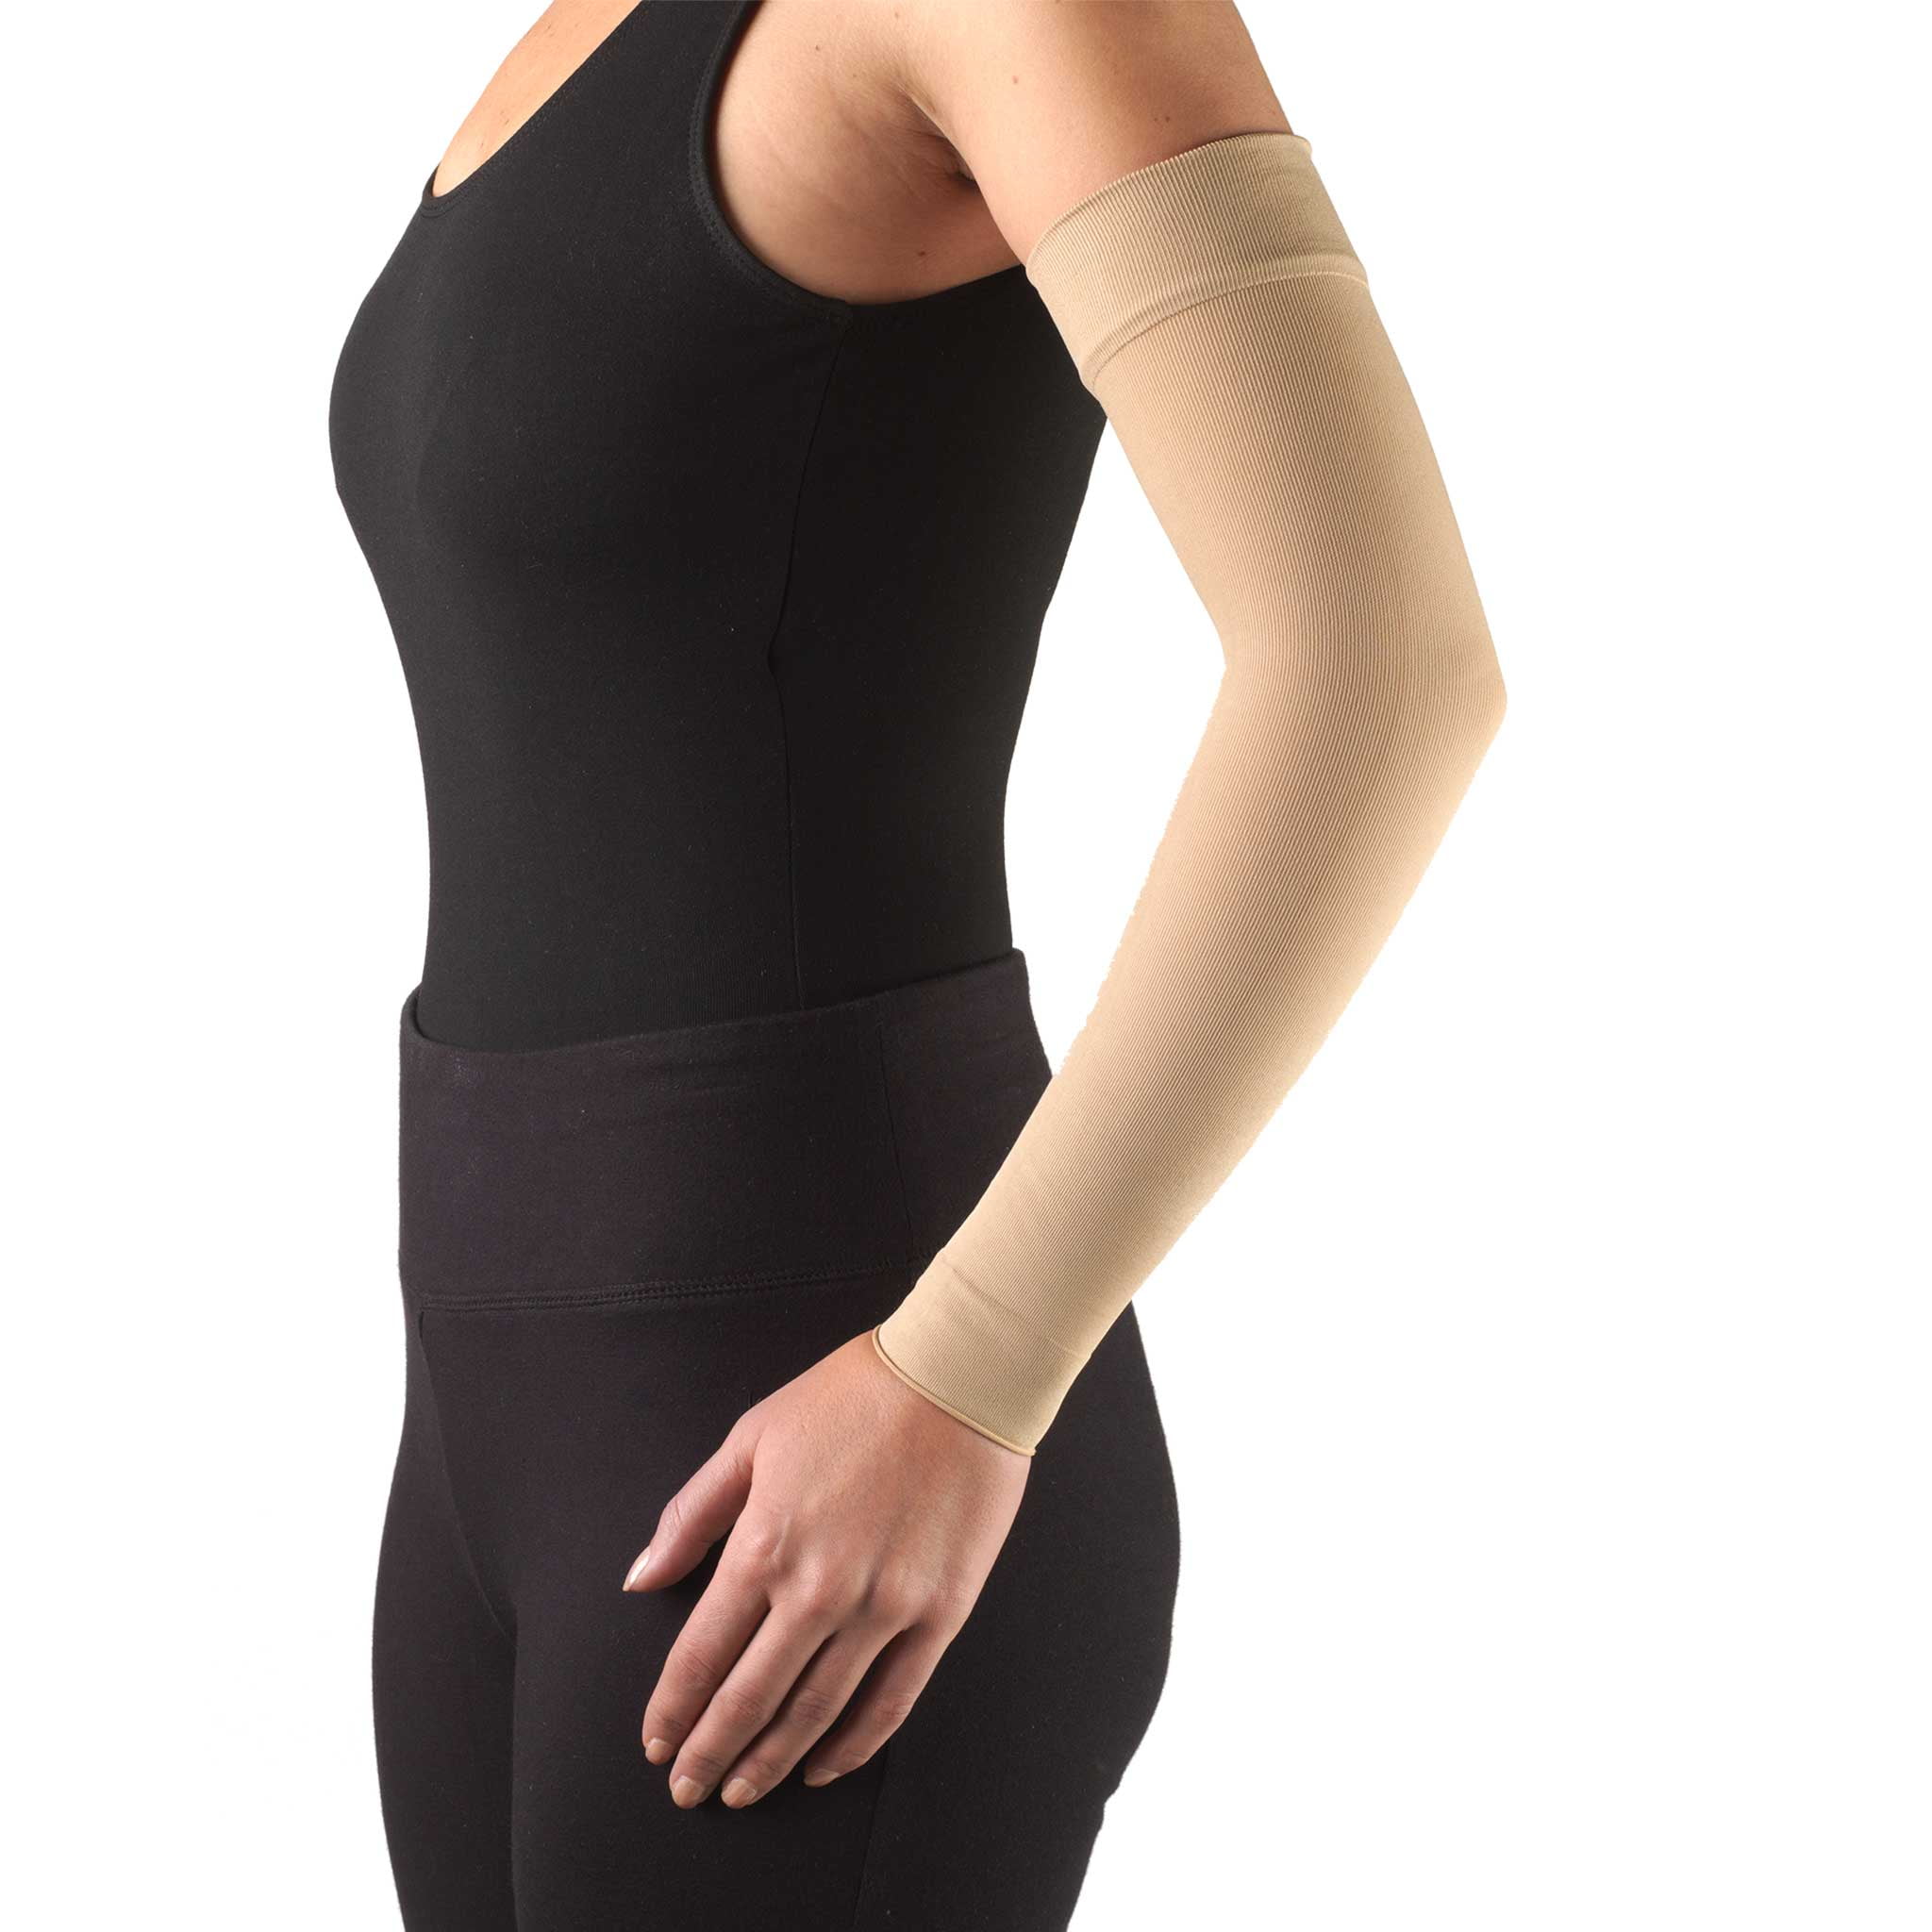 Trending Forearm Compression Sleeve 